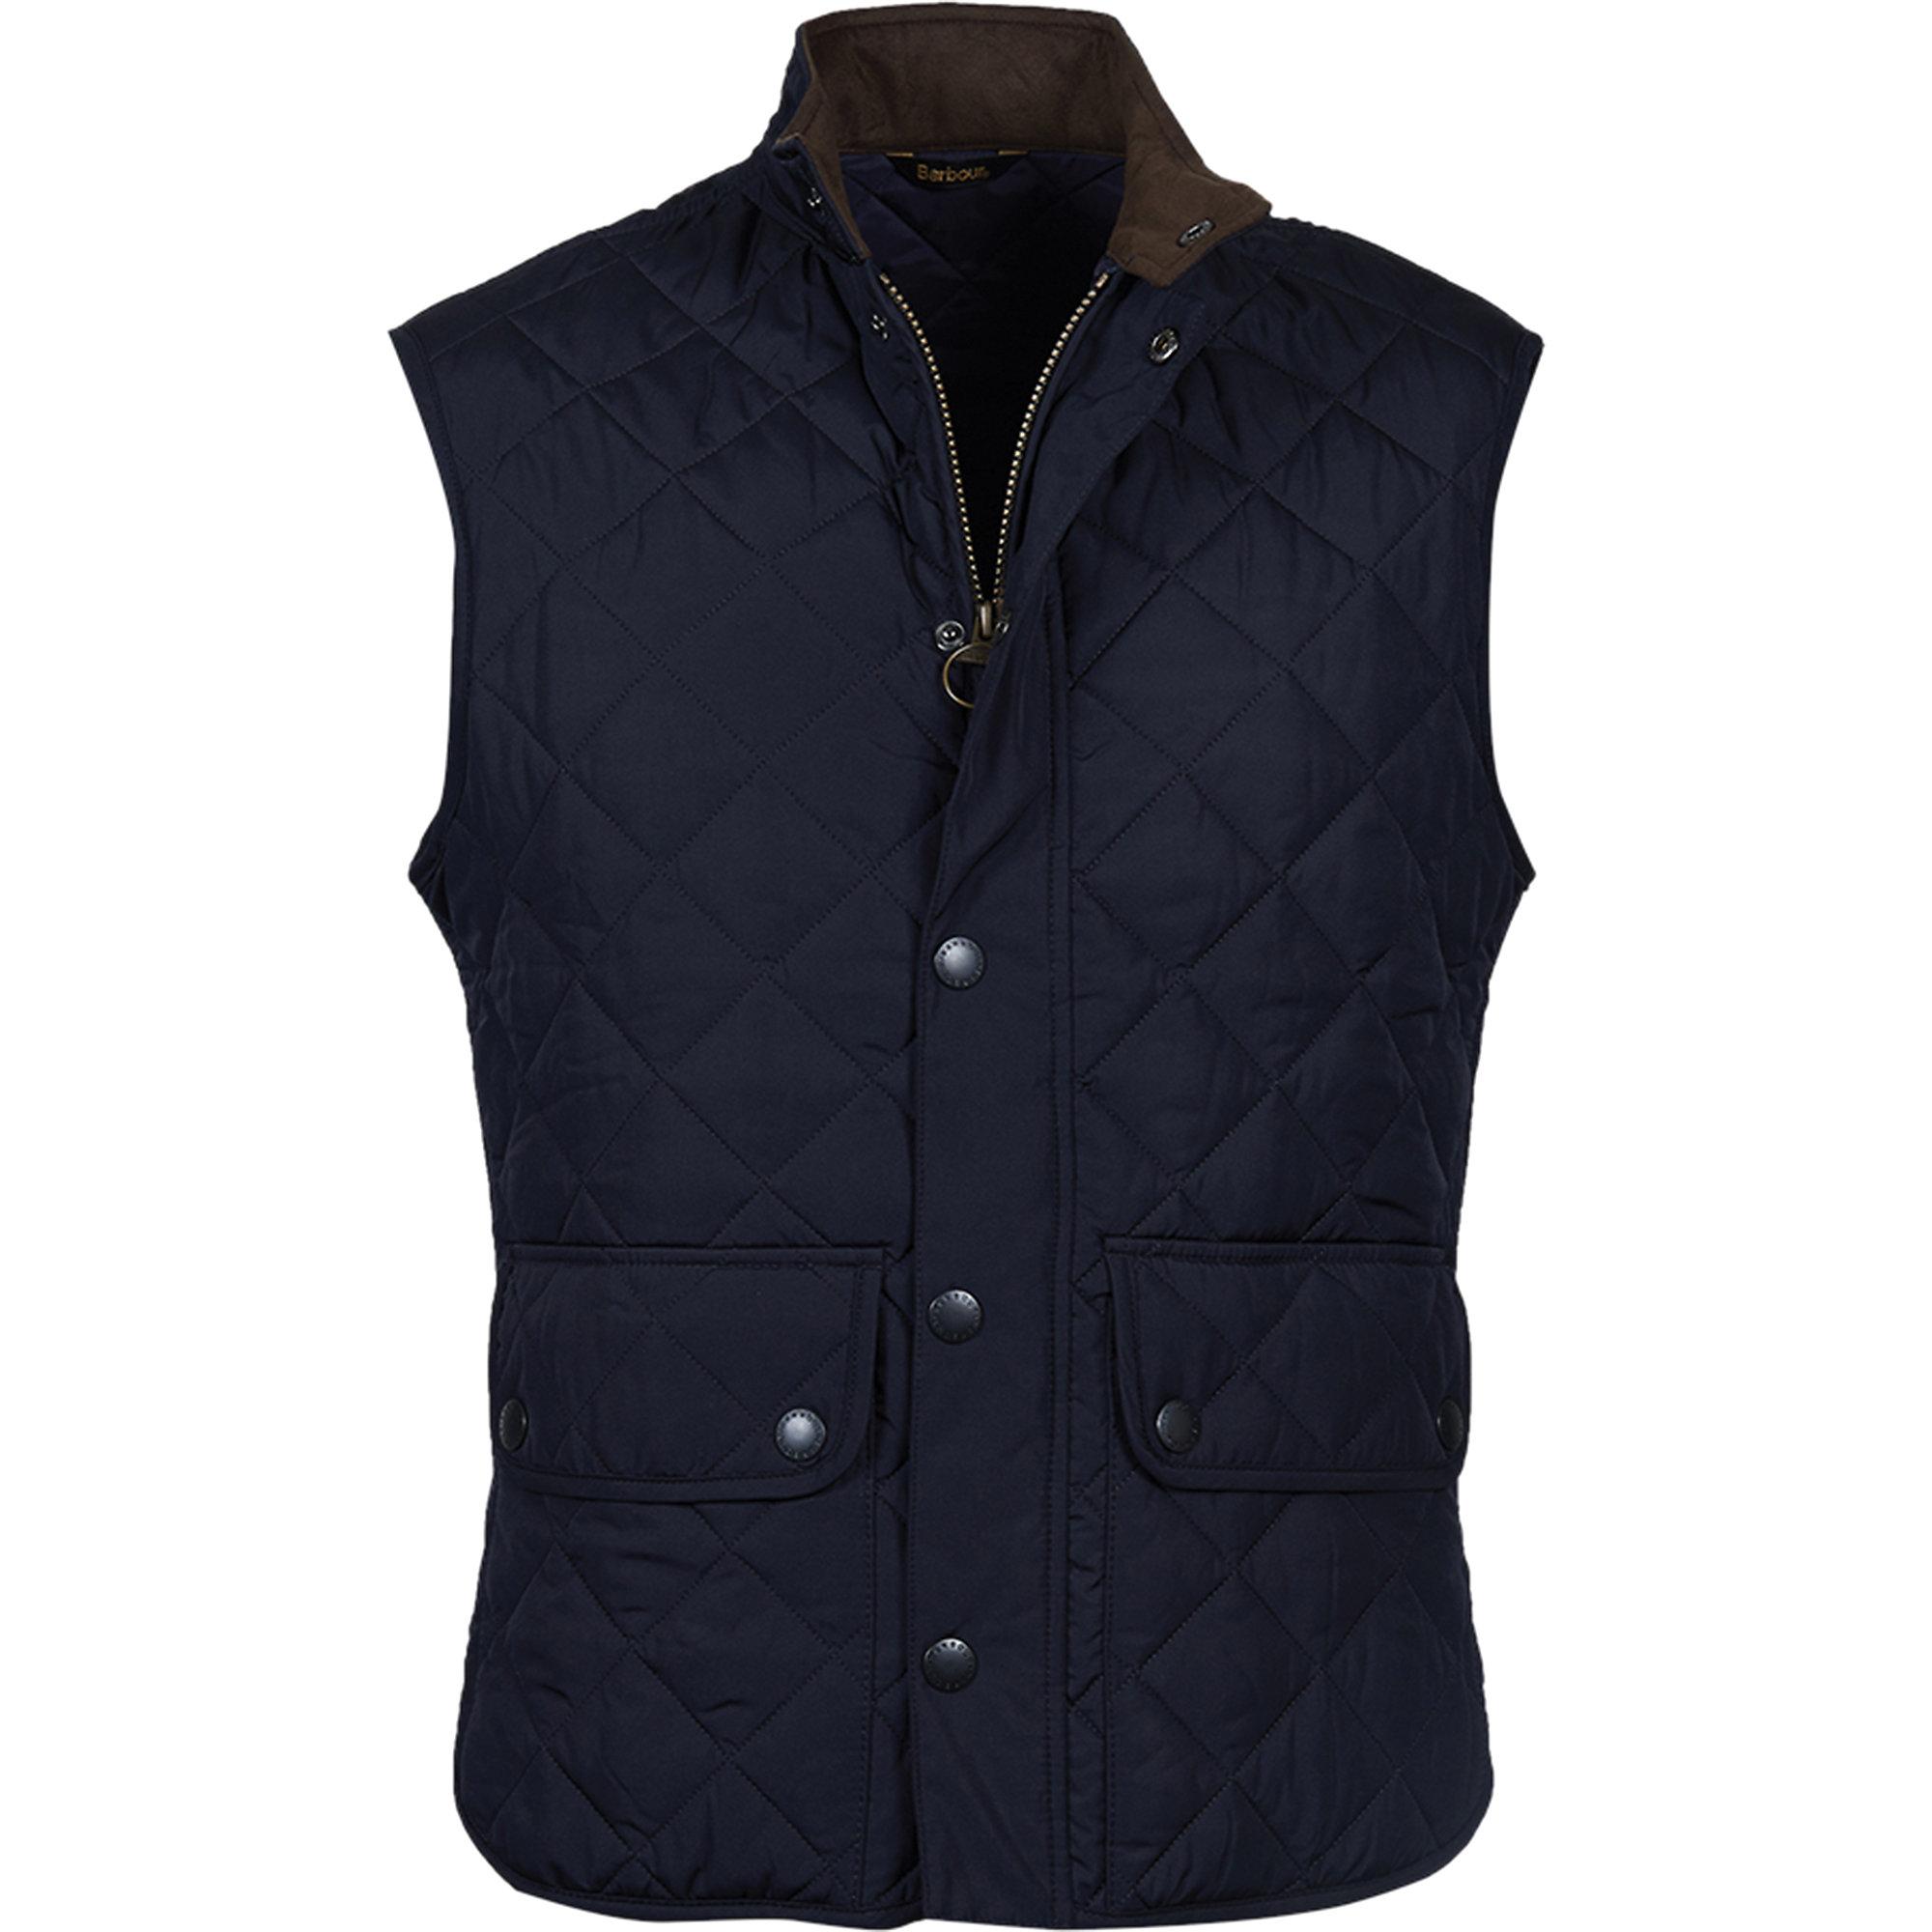 Barbour Leather Lowerdale Gilet in Navy (Blue) for Men - Lyst